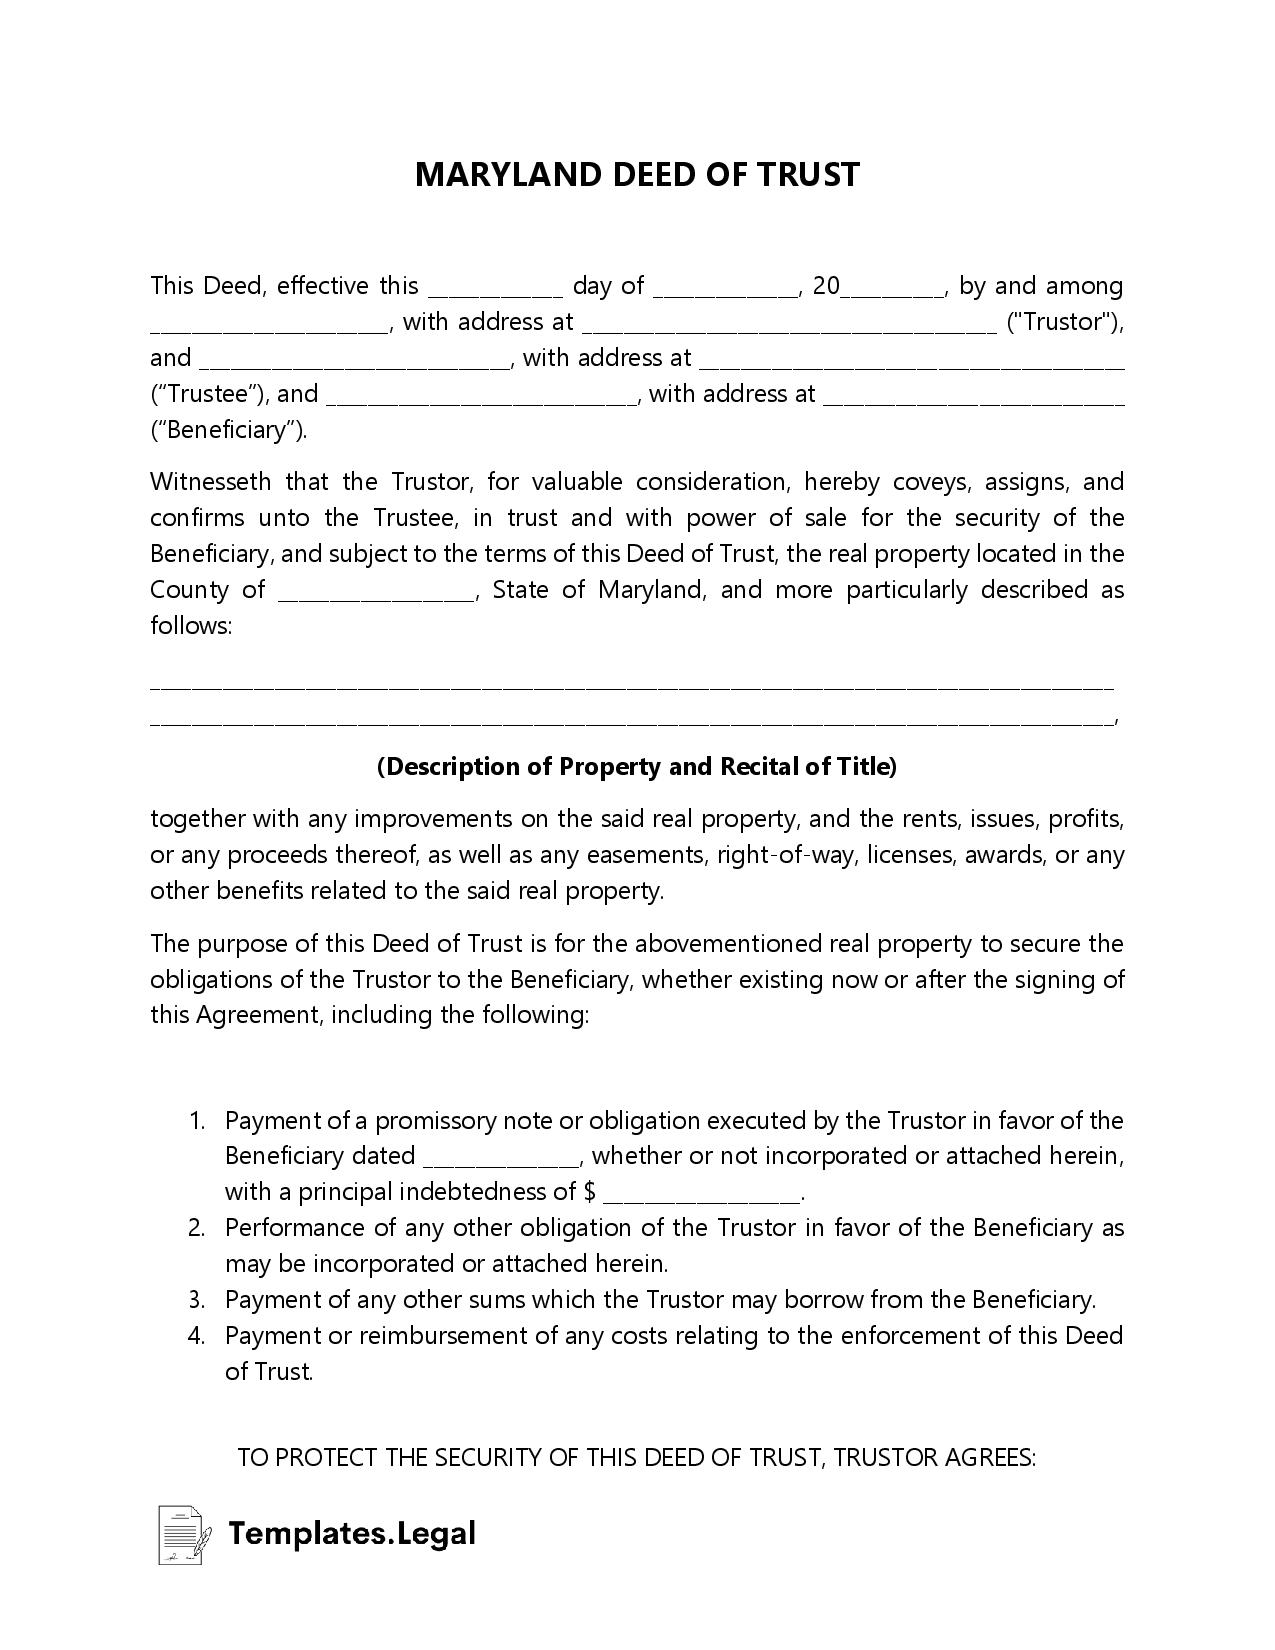 Maryland Deed of Trust - Templates.Legal